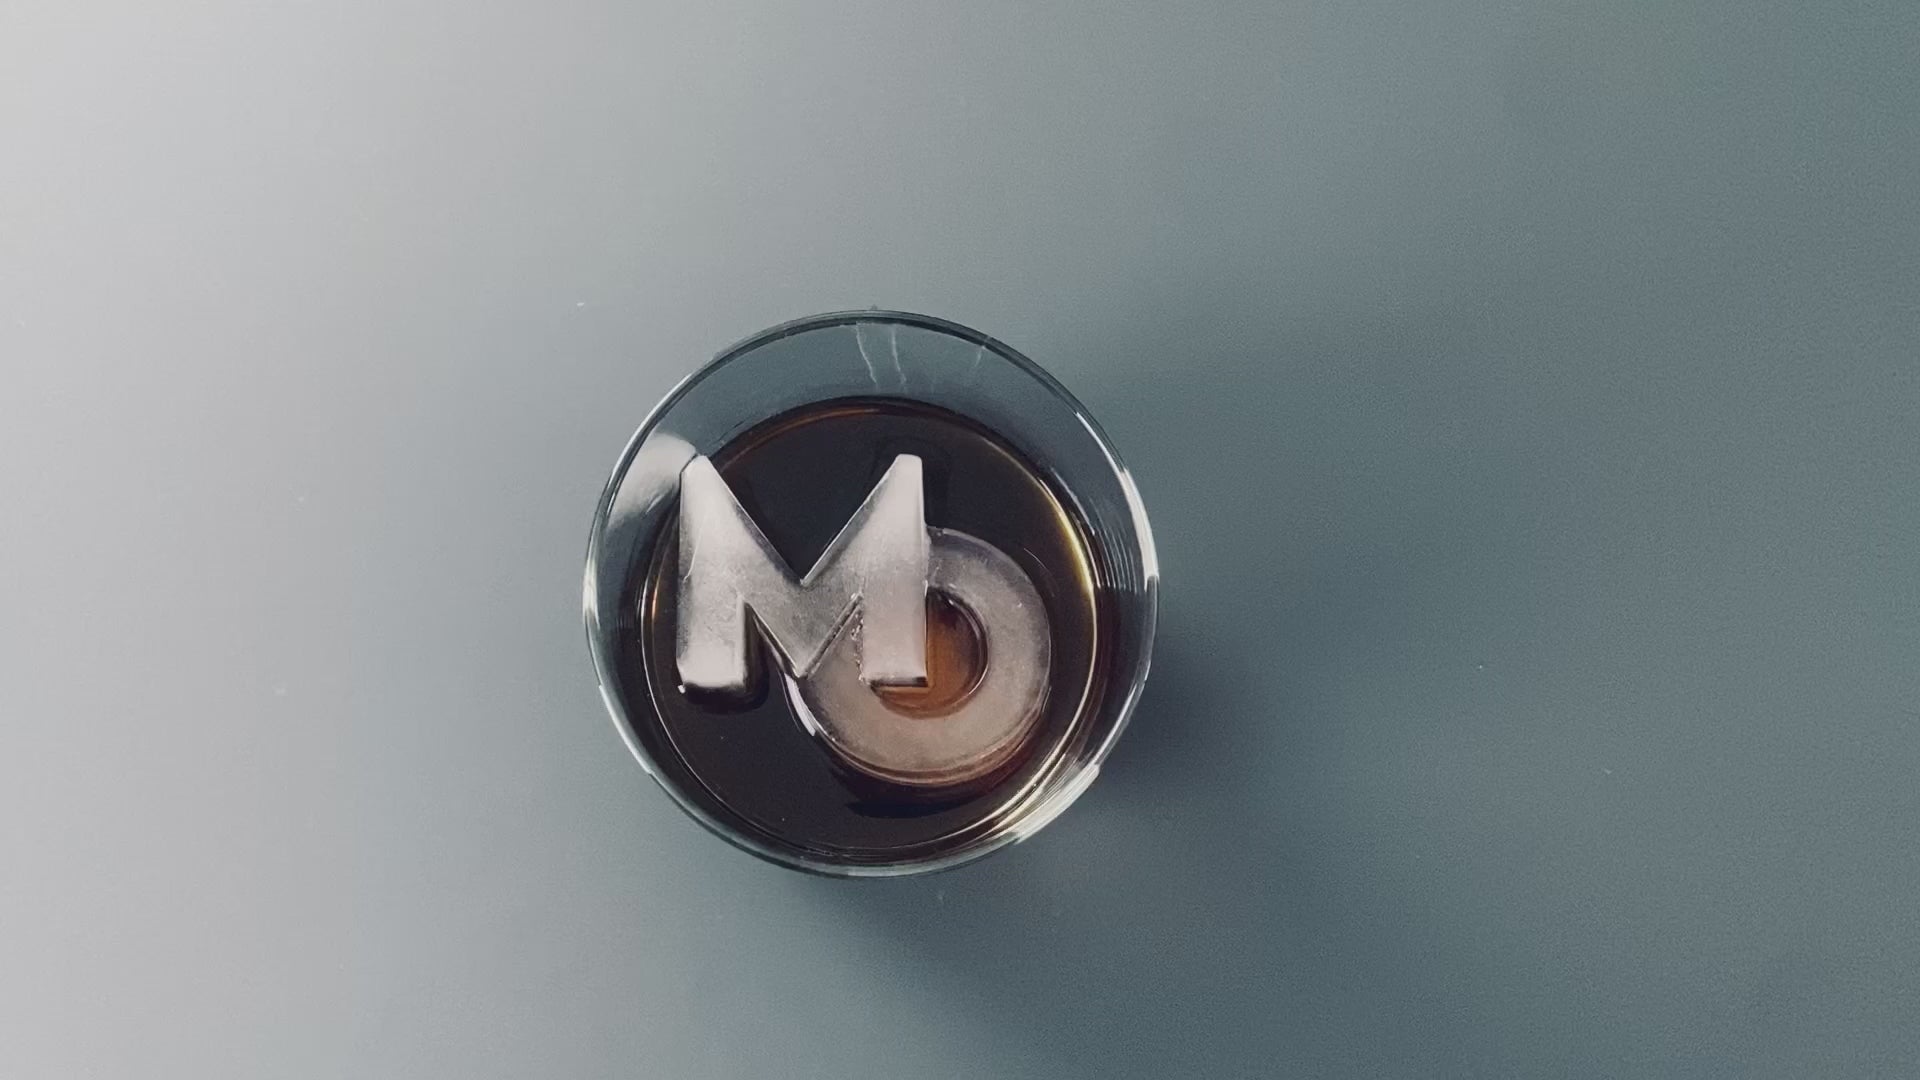 2 Large Monogram Ice Cube Molds for Cocktails - Custom Letter A